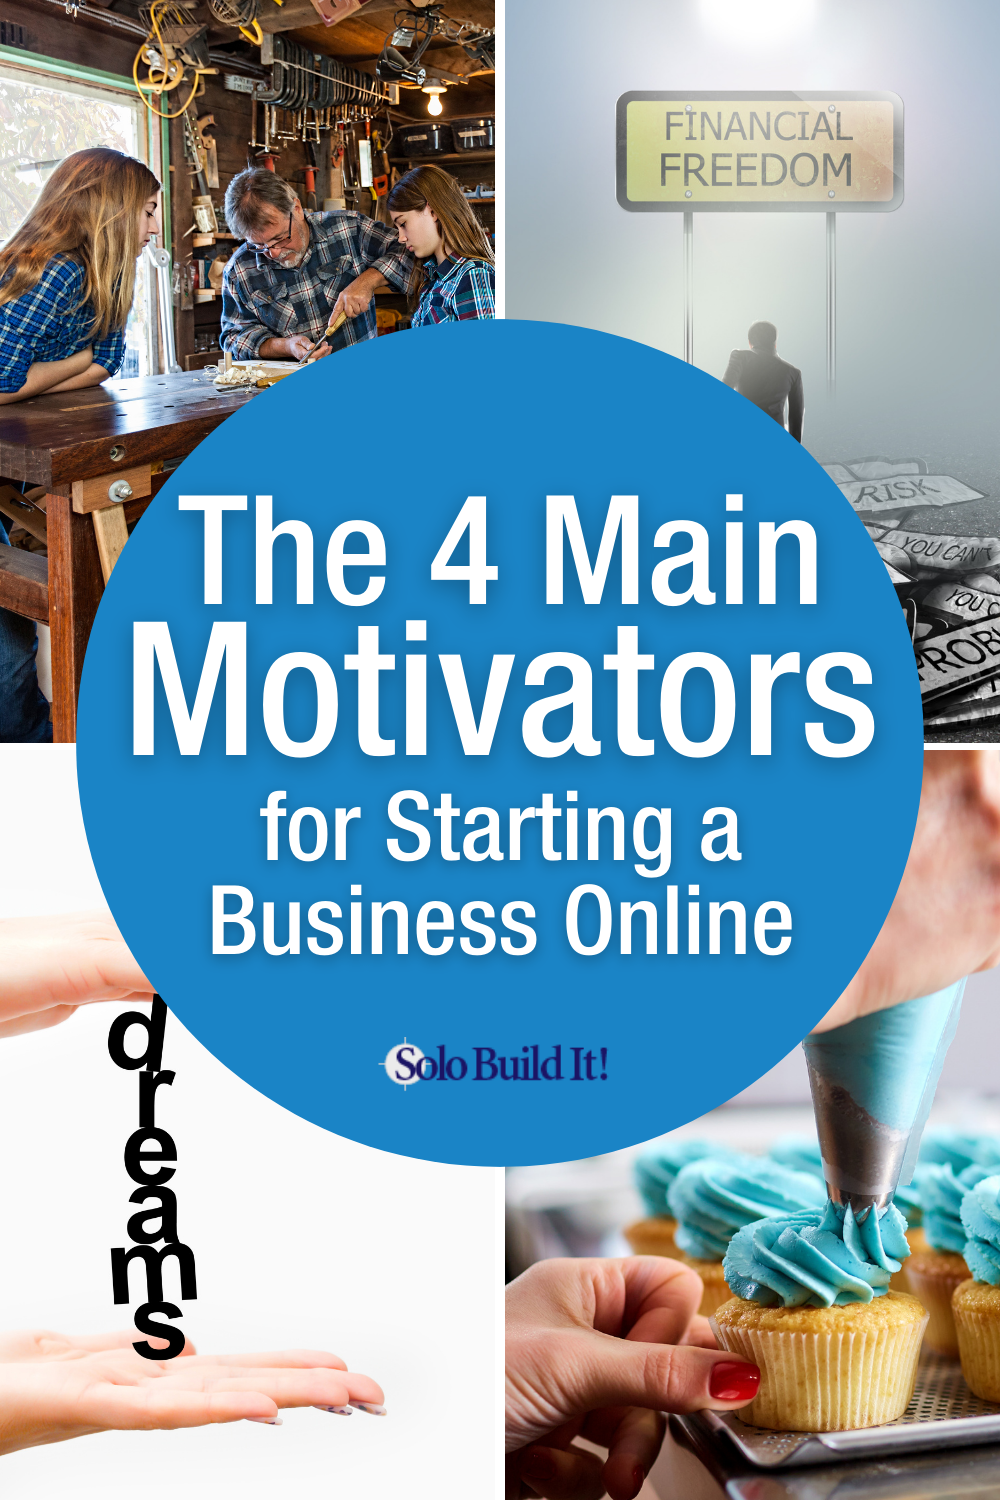 What\'s Your Motivation to Start a Business Online?